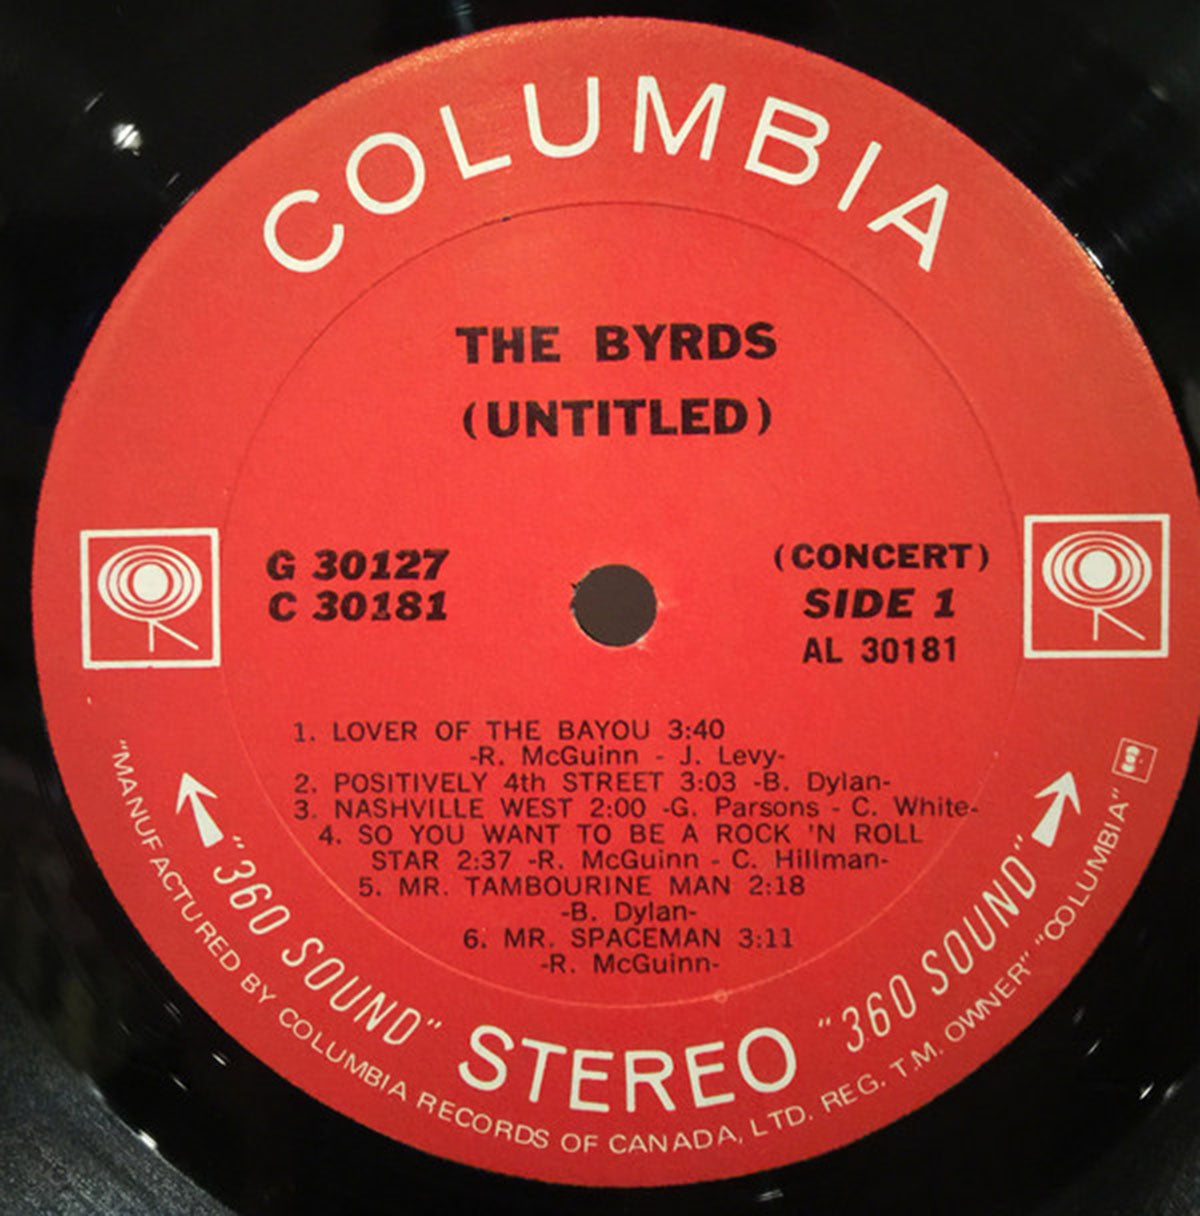 The Byrds – (Untitled)